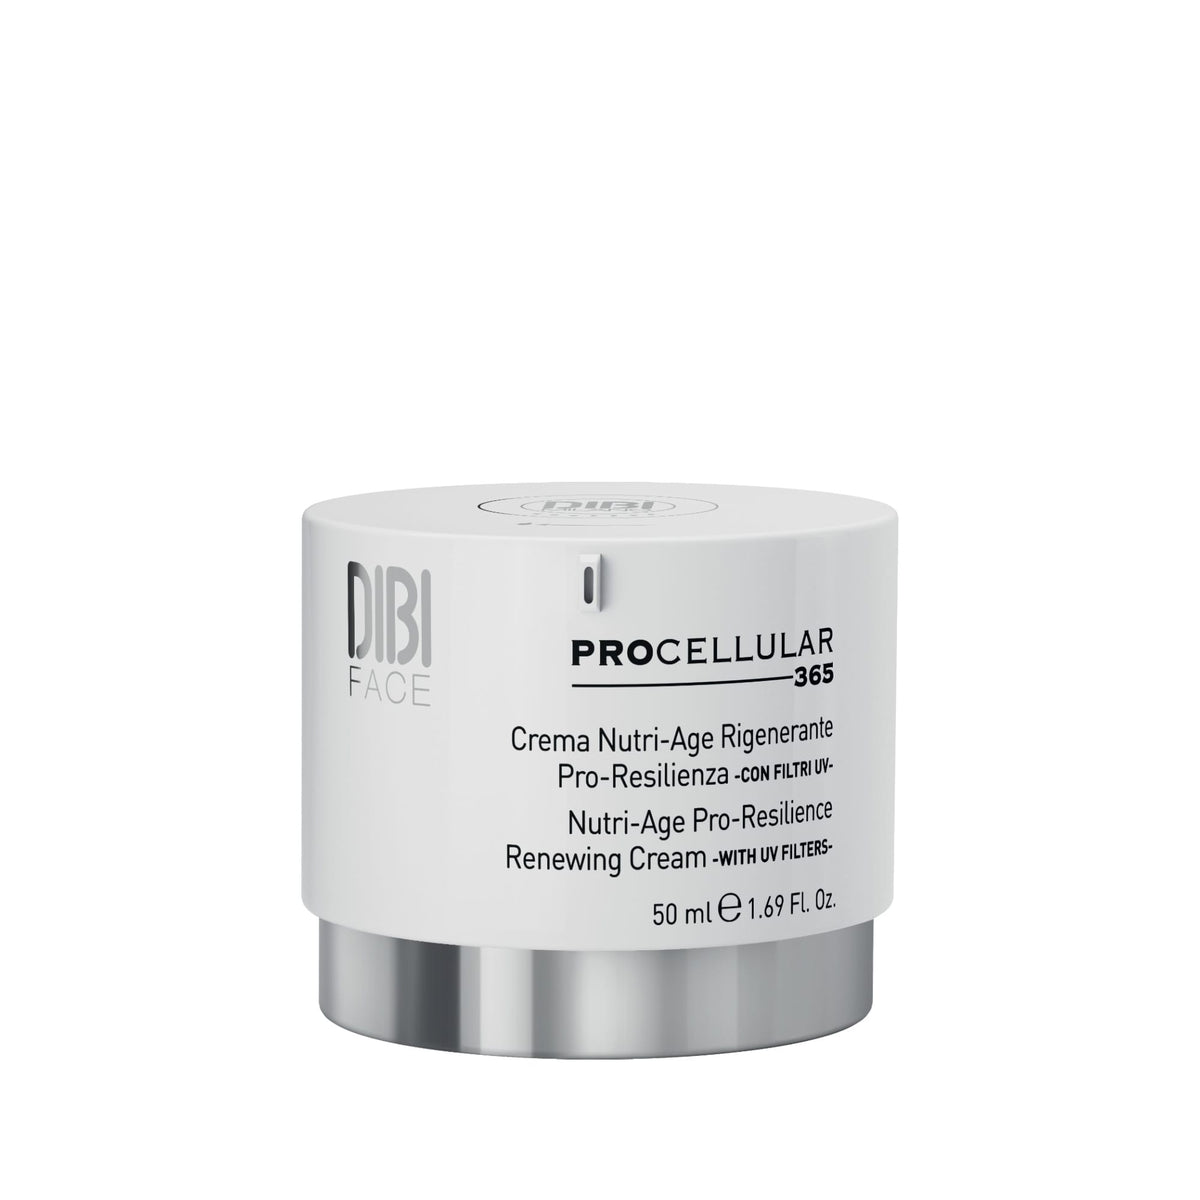 Nutri-Age Pro-Resilience Renewing Cream with UV Filters - 50ml